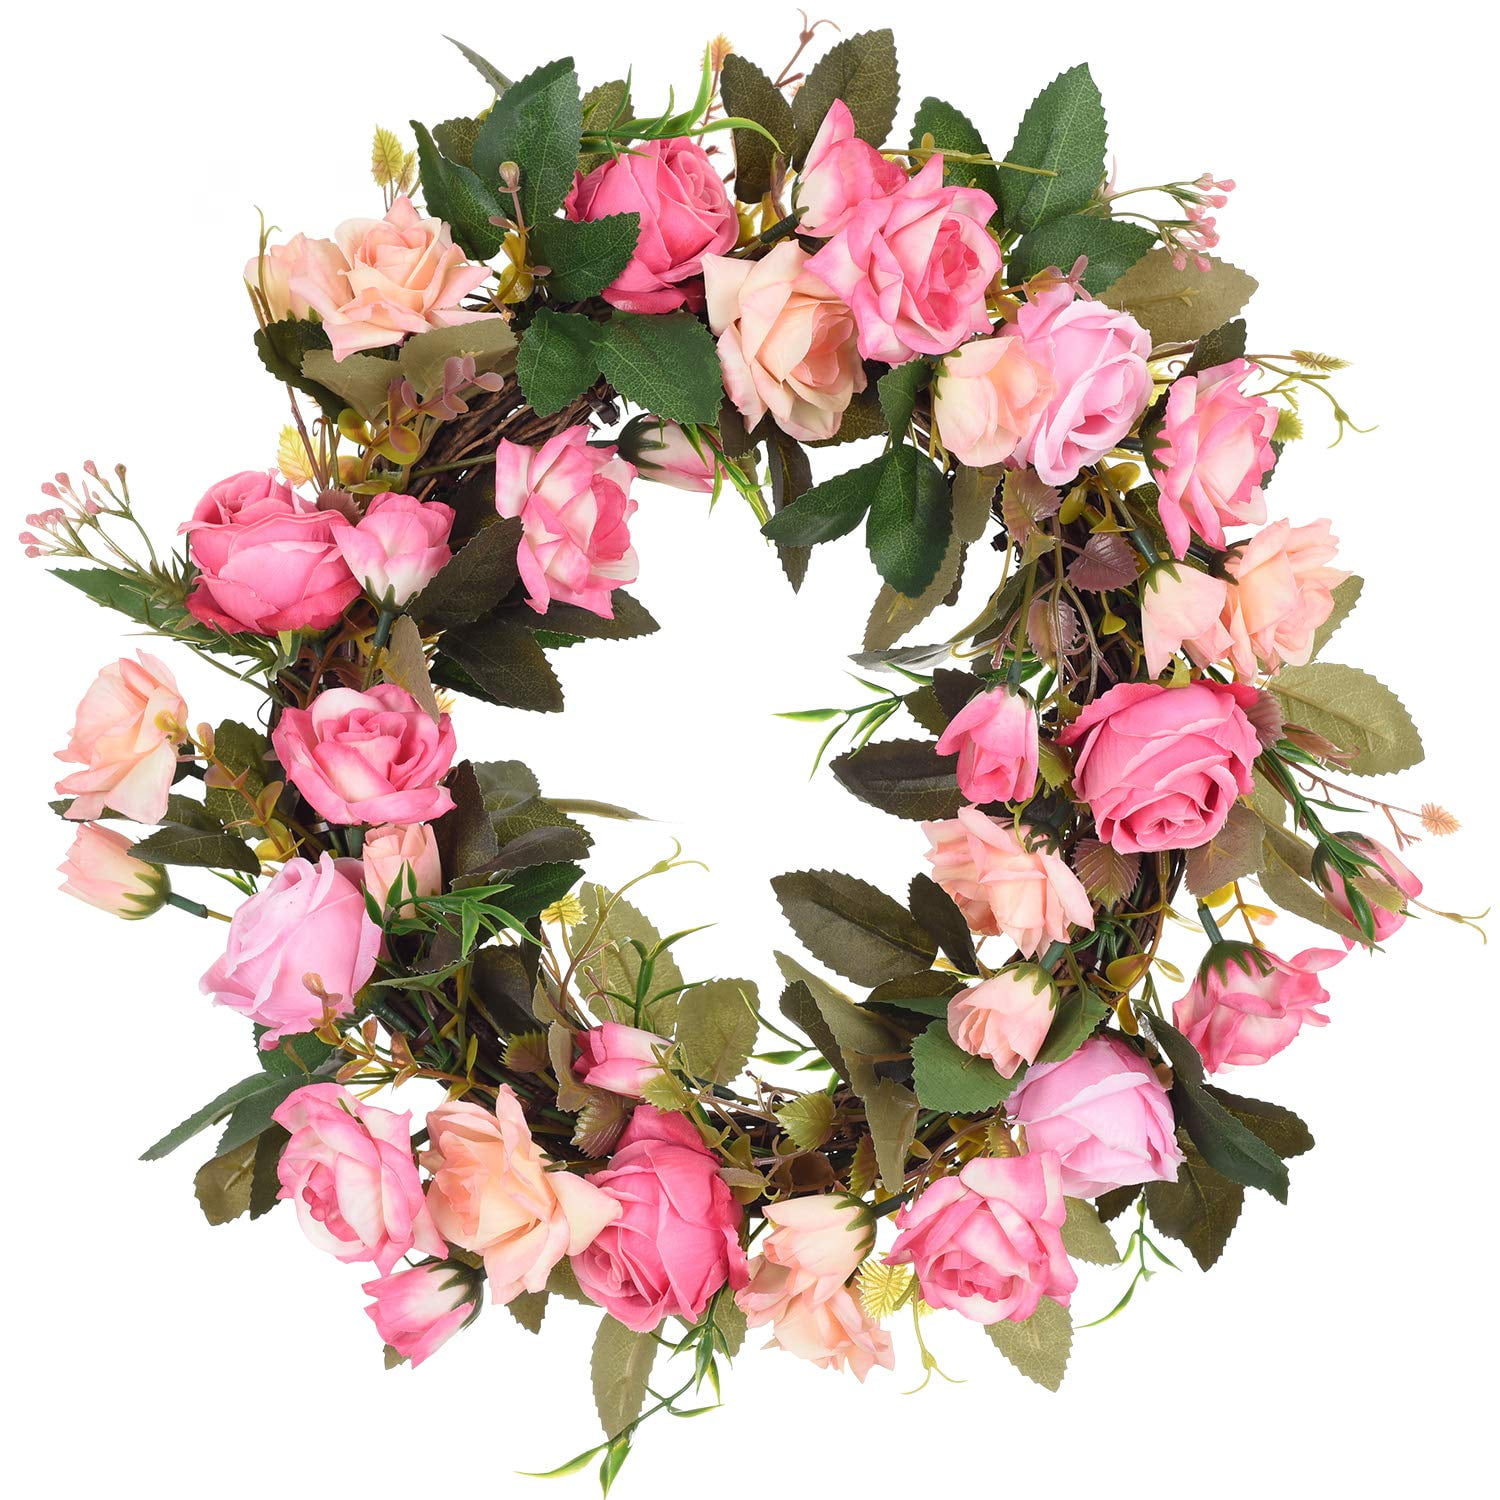 Travelwant Heart Shaped Metal Floral Wreath Frame for Flowers, DIY Summer Wreath for Front Door Metal Wreaths Frames for DIY Artificial Garland Wreath